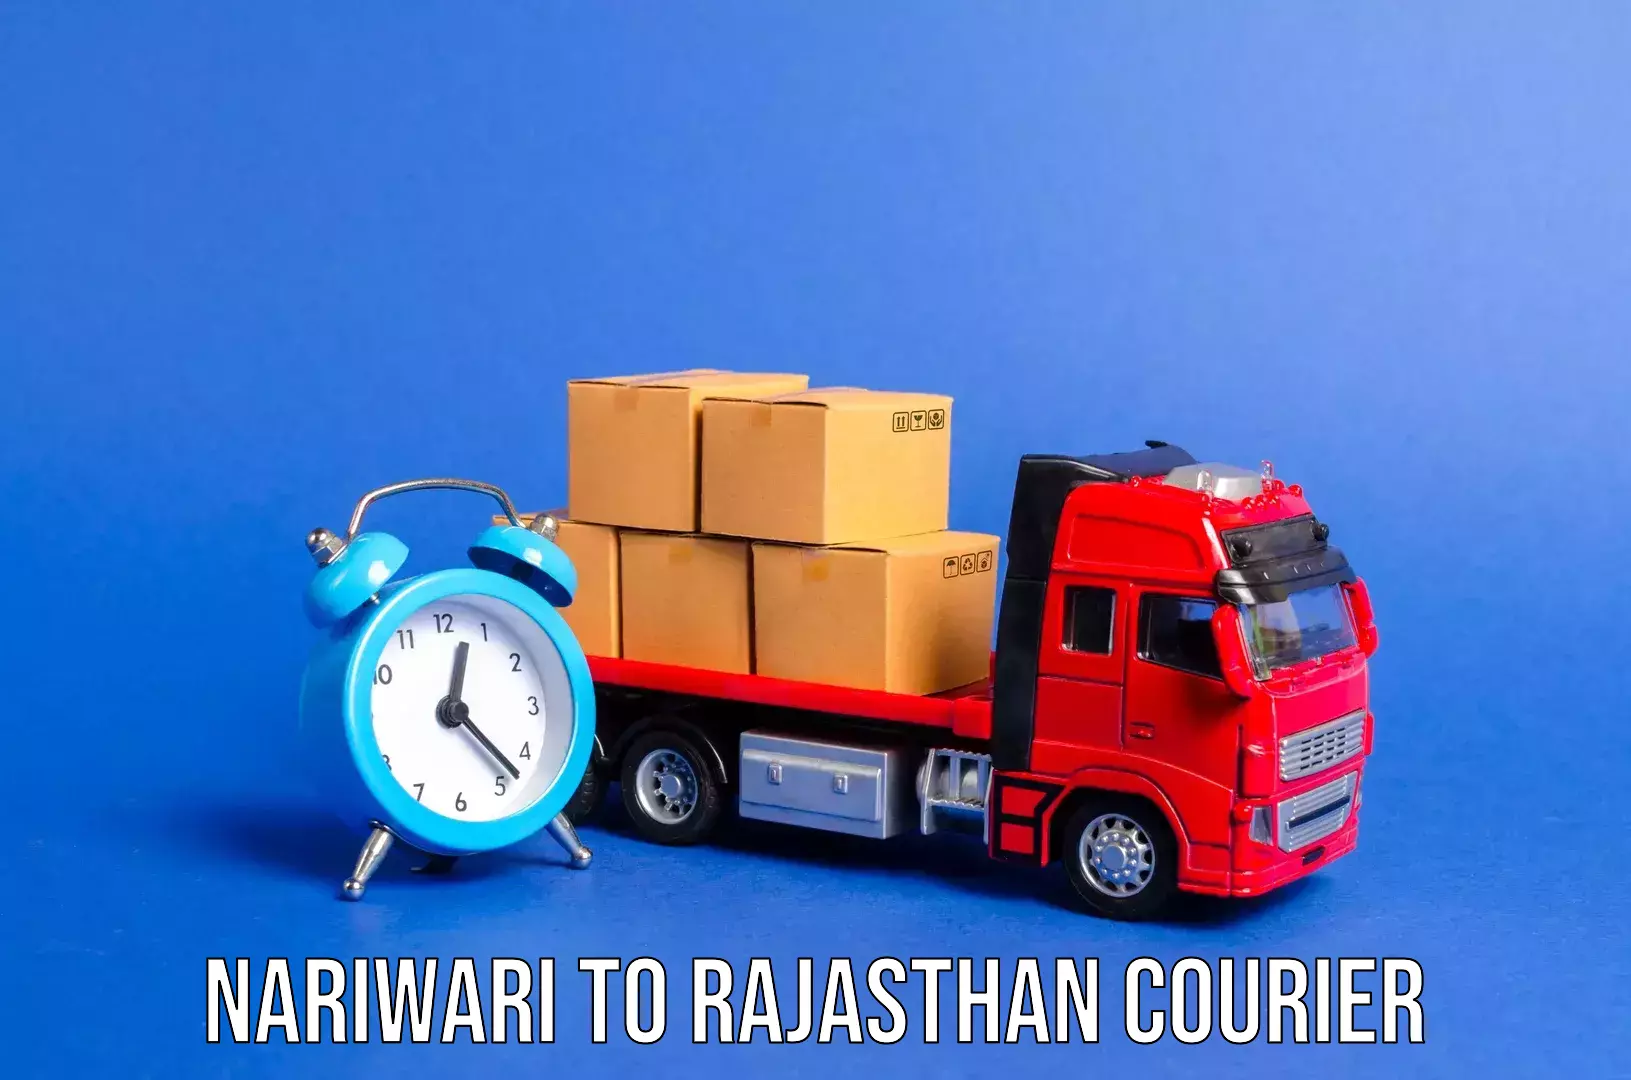 Luggage shipment specialists Nariwari to Rupbas